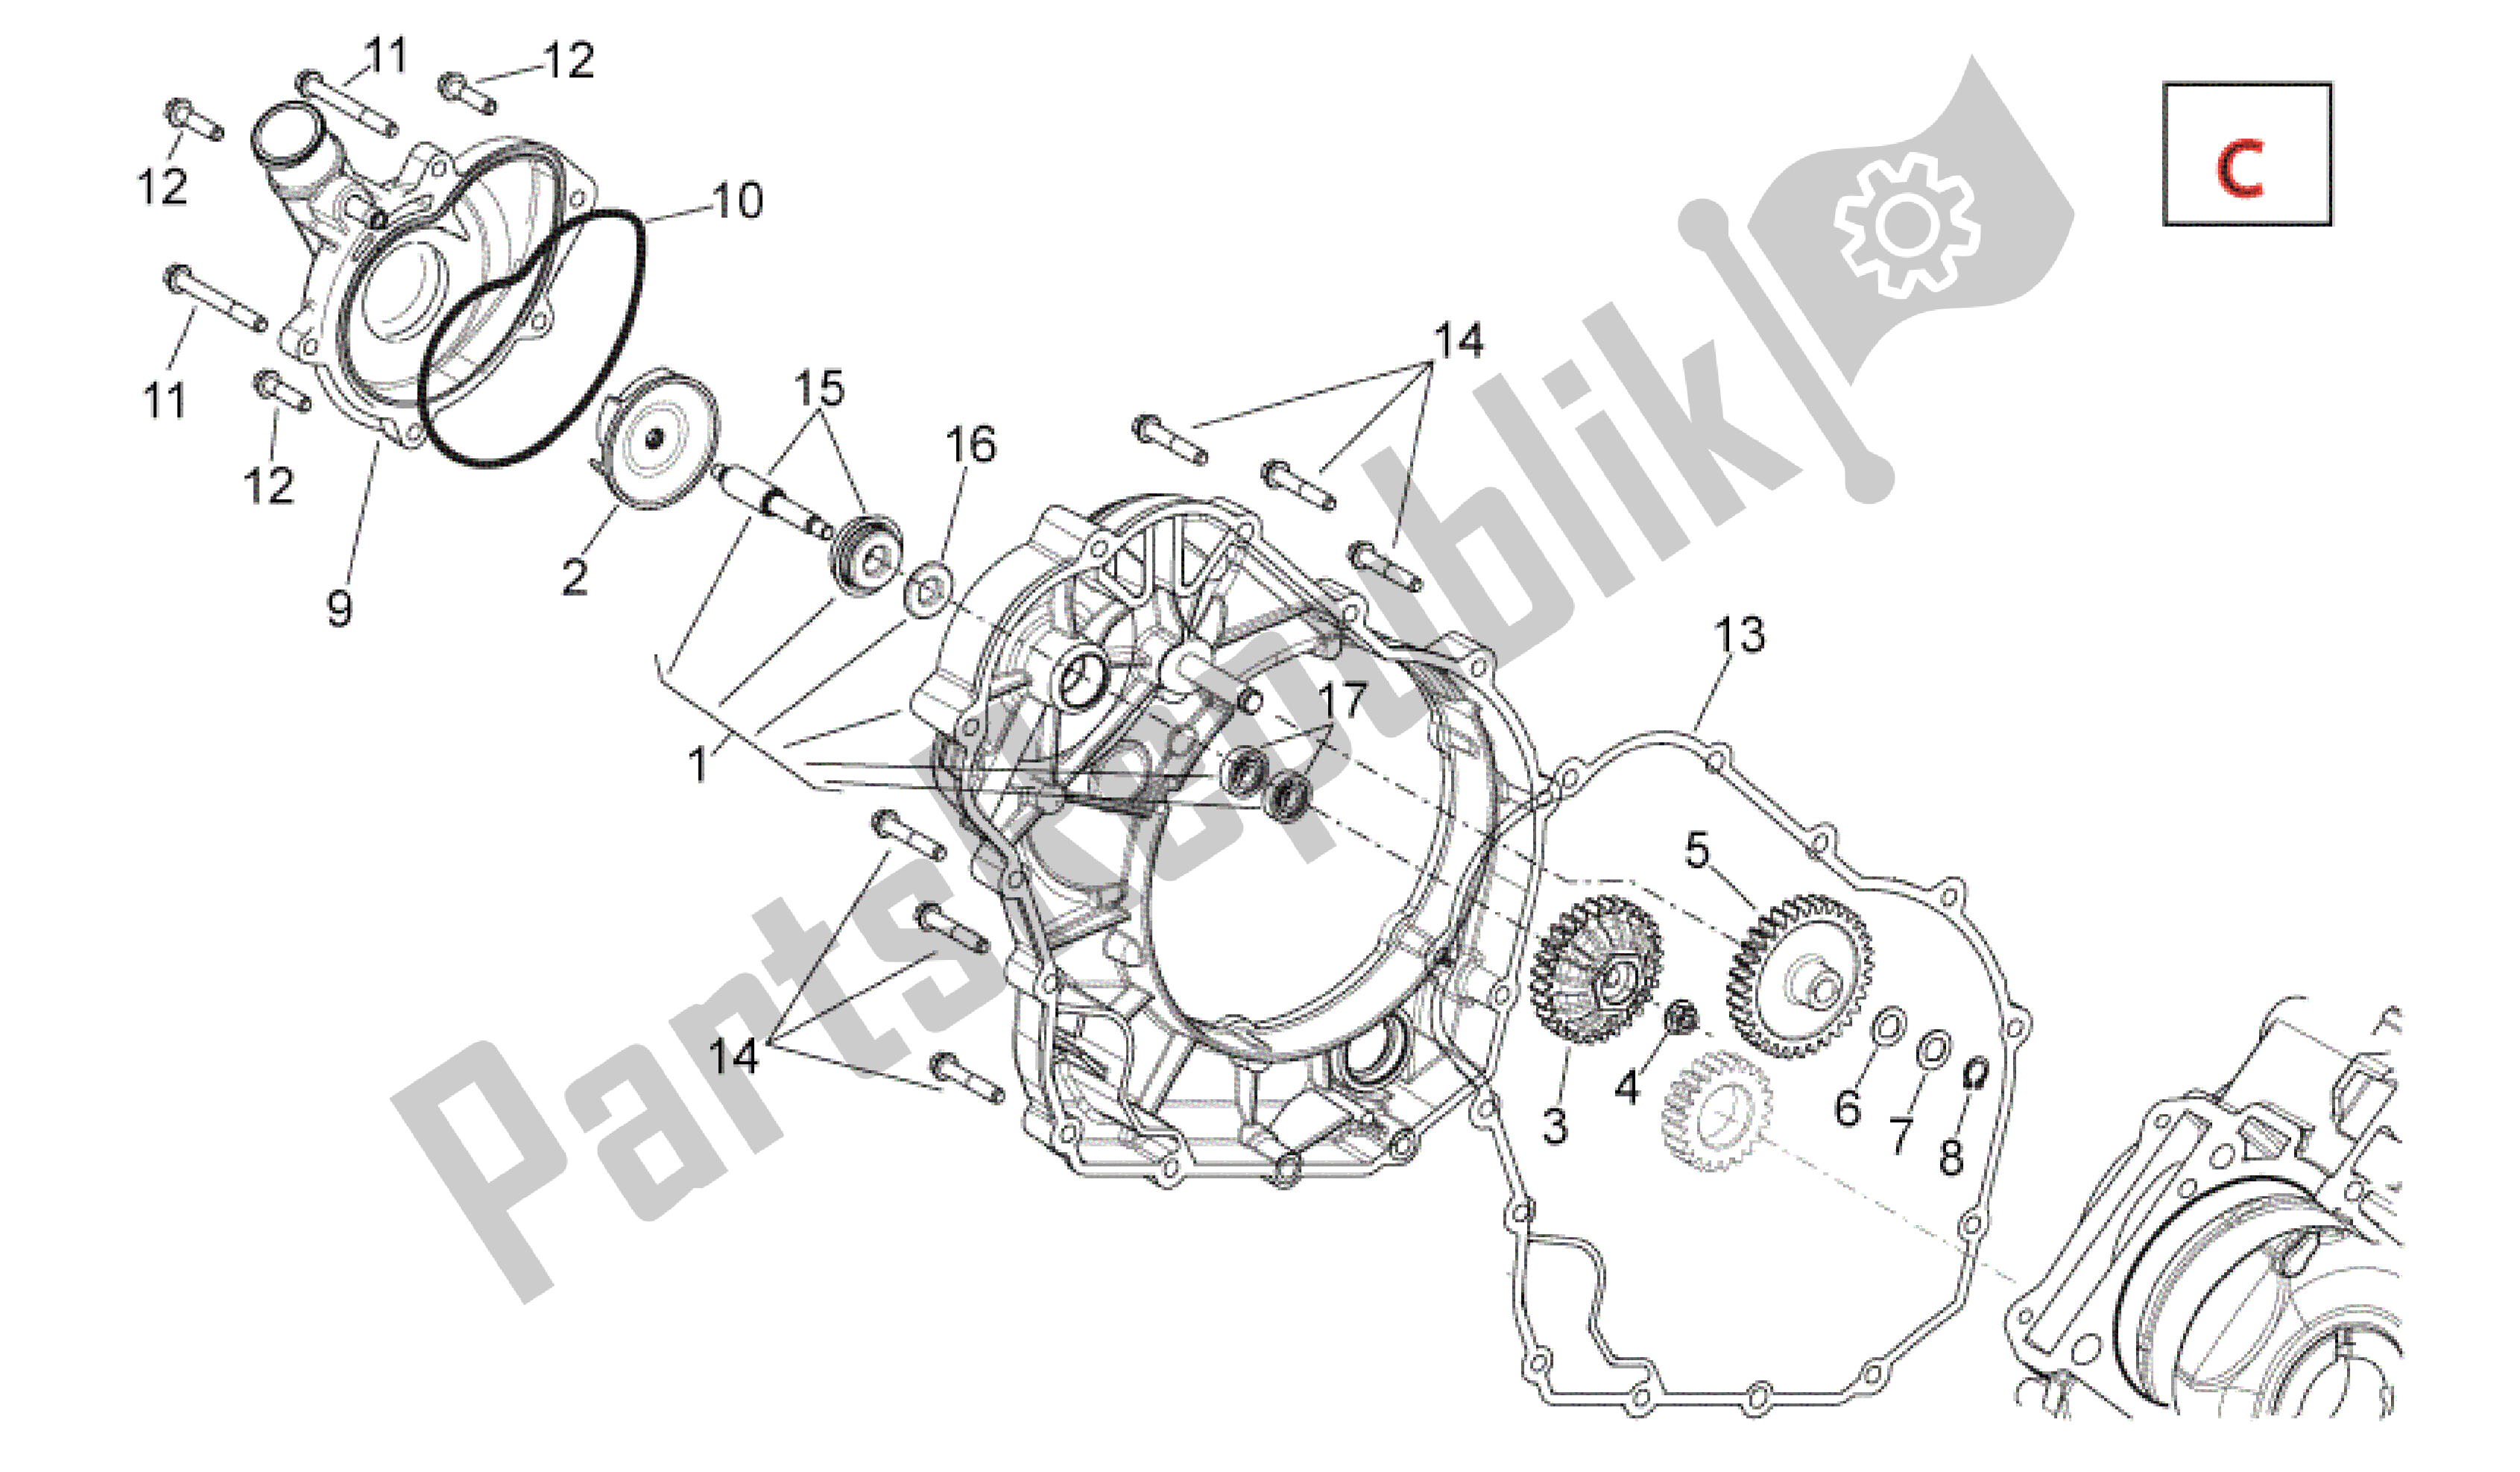 All parts for the Water Pump of the Aprilia Shiver 750 2007 - 2009